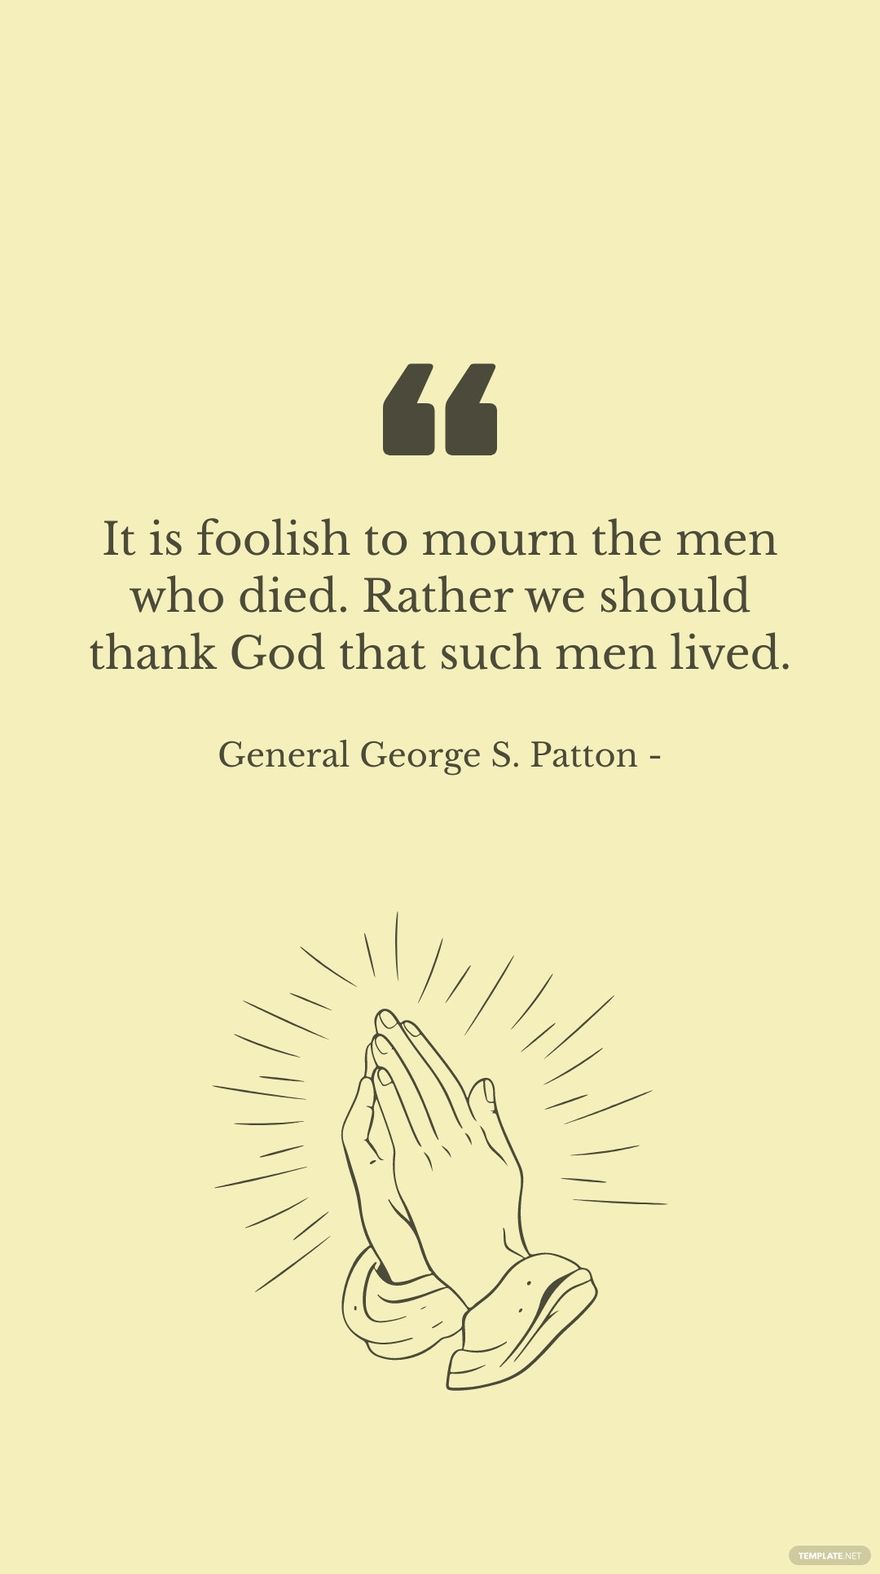 General George S. Patton - It is foolish to mourn the men who died. Rather we should thank God that such men lived. in JPG